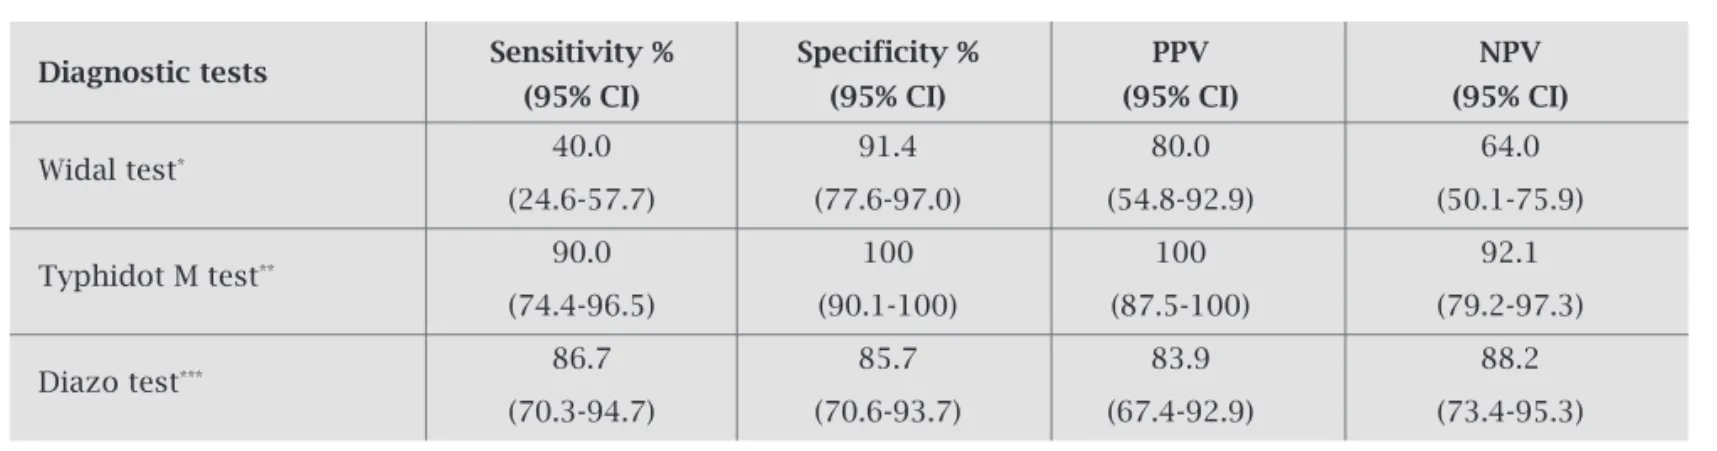 Table 1. Diagnostic parameters of various tests among culture positive cases (n = 30)